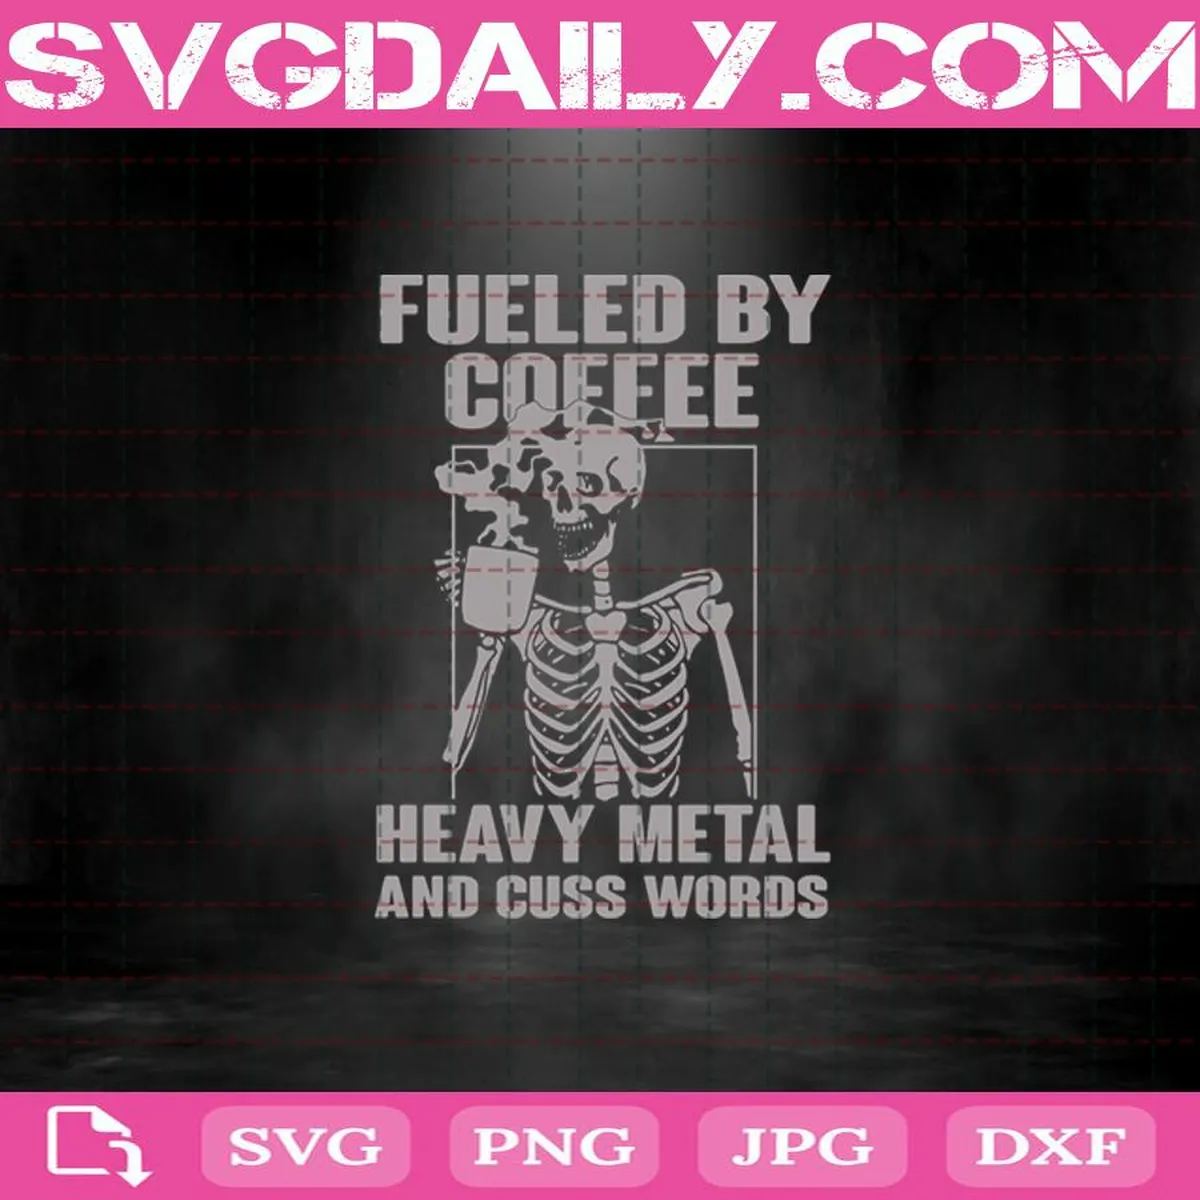 Fuelded By Coffee Heavy Metal And Cuss Words Svg, Skeleton Svg, Coffee Svg, Cuss Words Svg, Halloween Svg